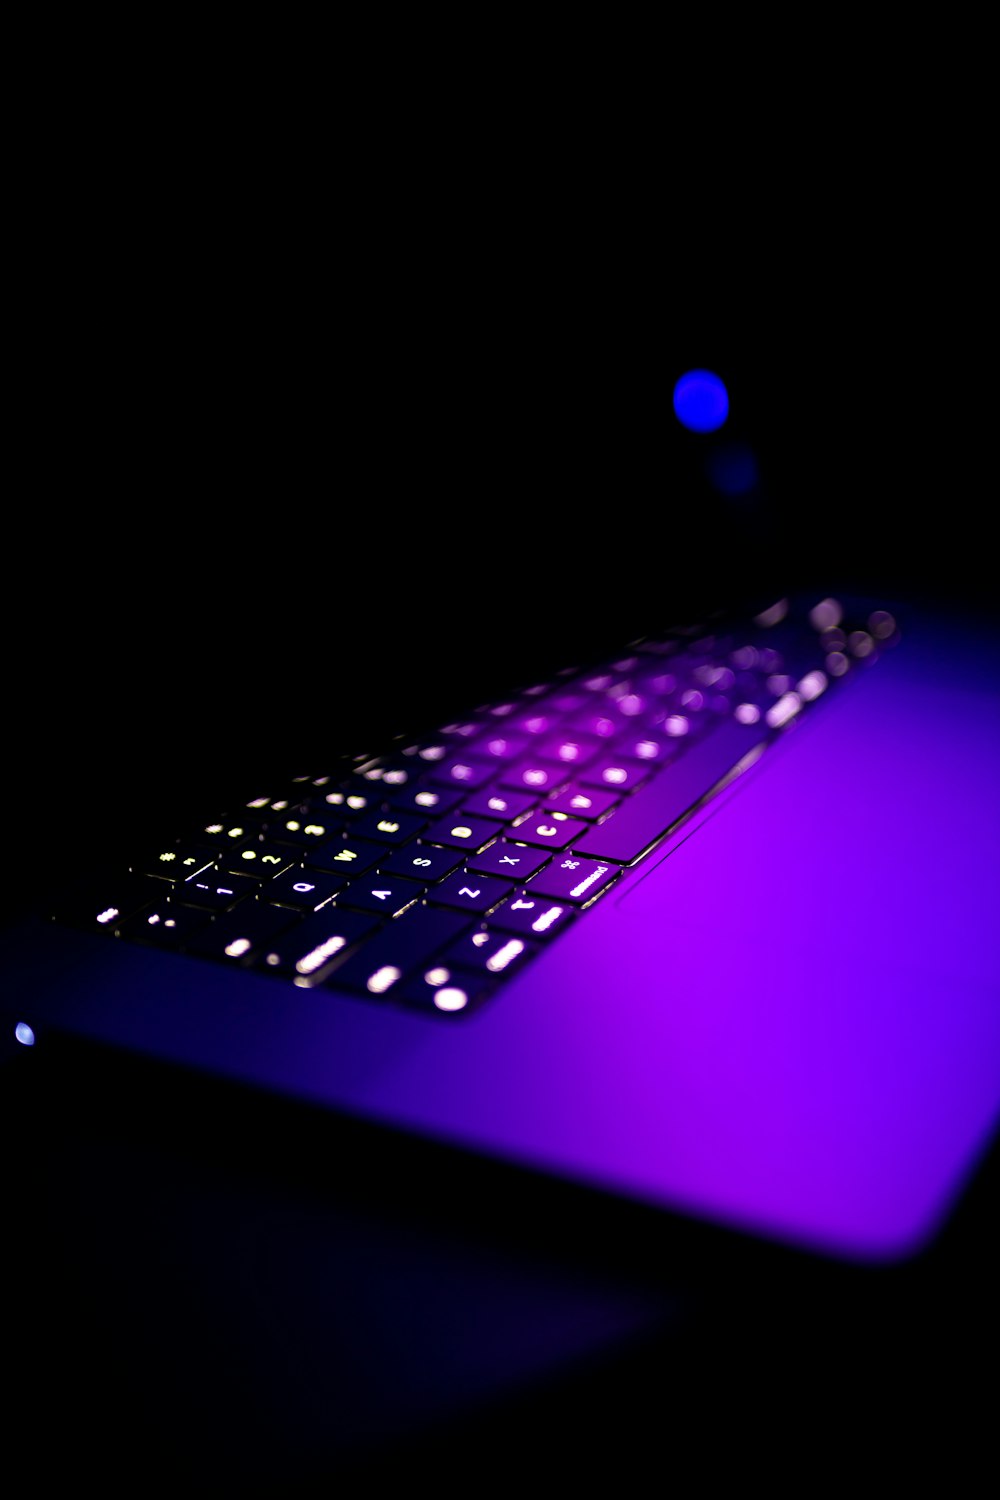 a computer keyboard lit up in the dark